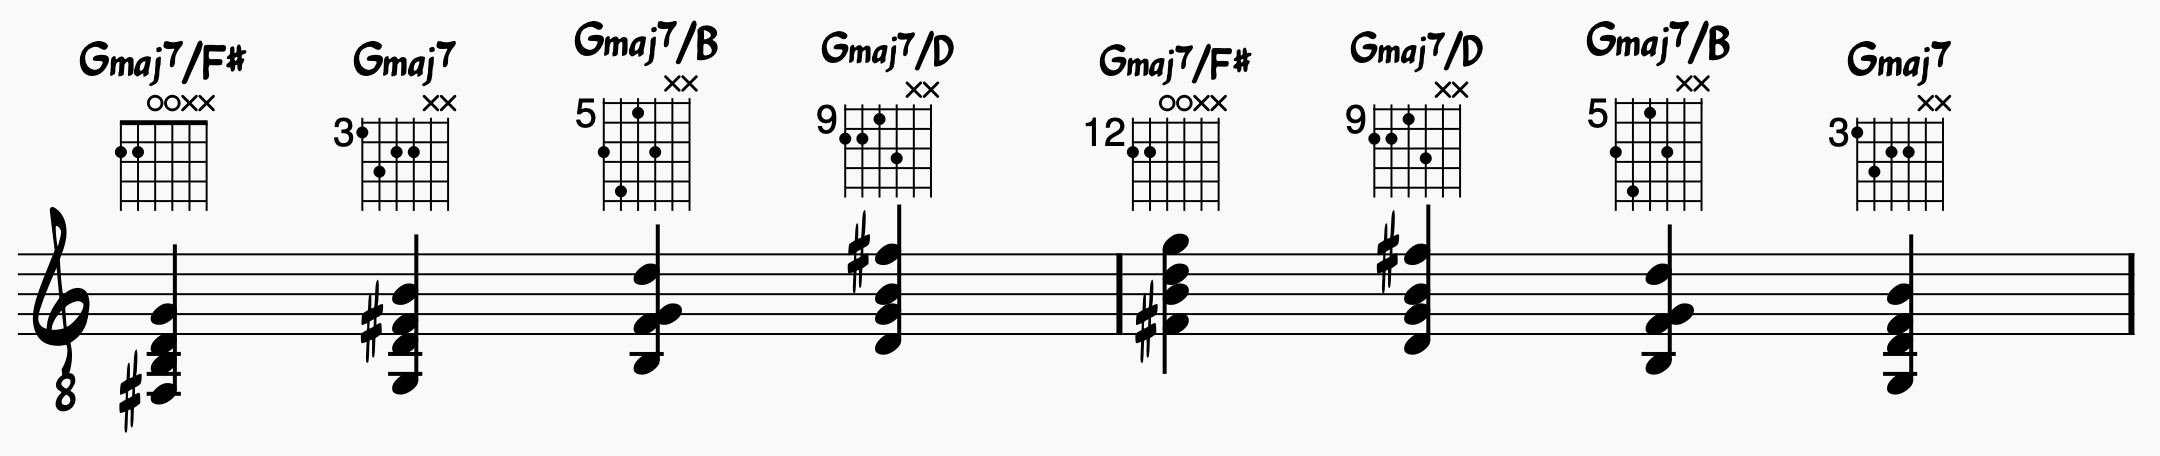 Major chord switching exercises using quarter notes; 7th chords and inversions